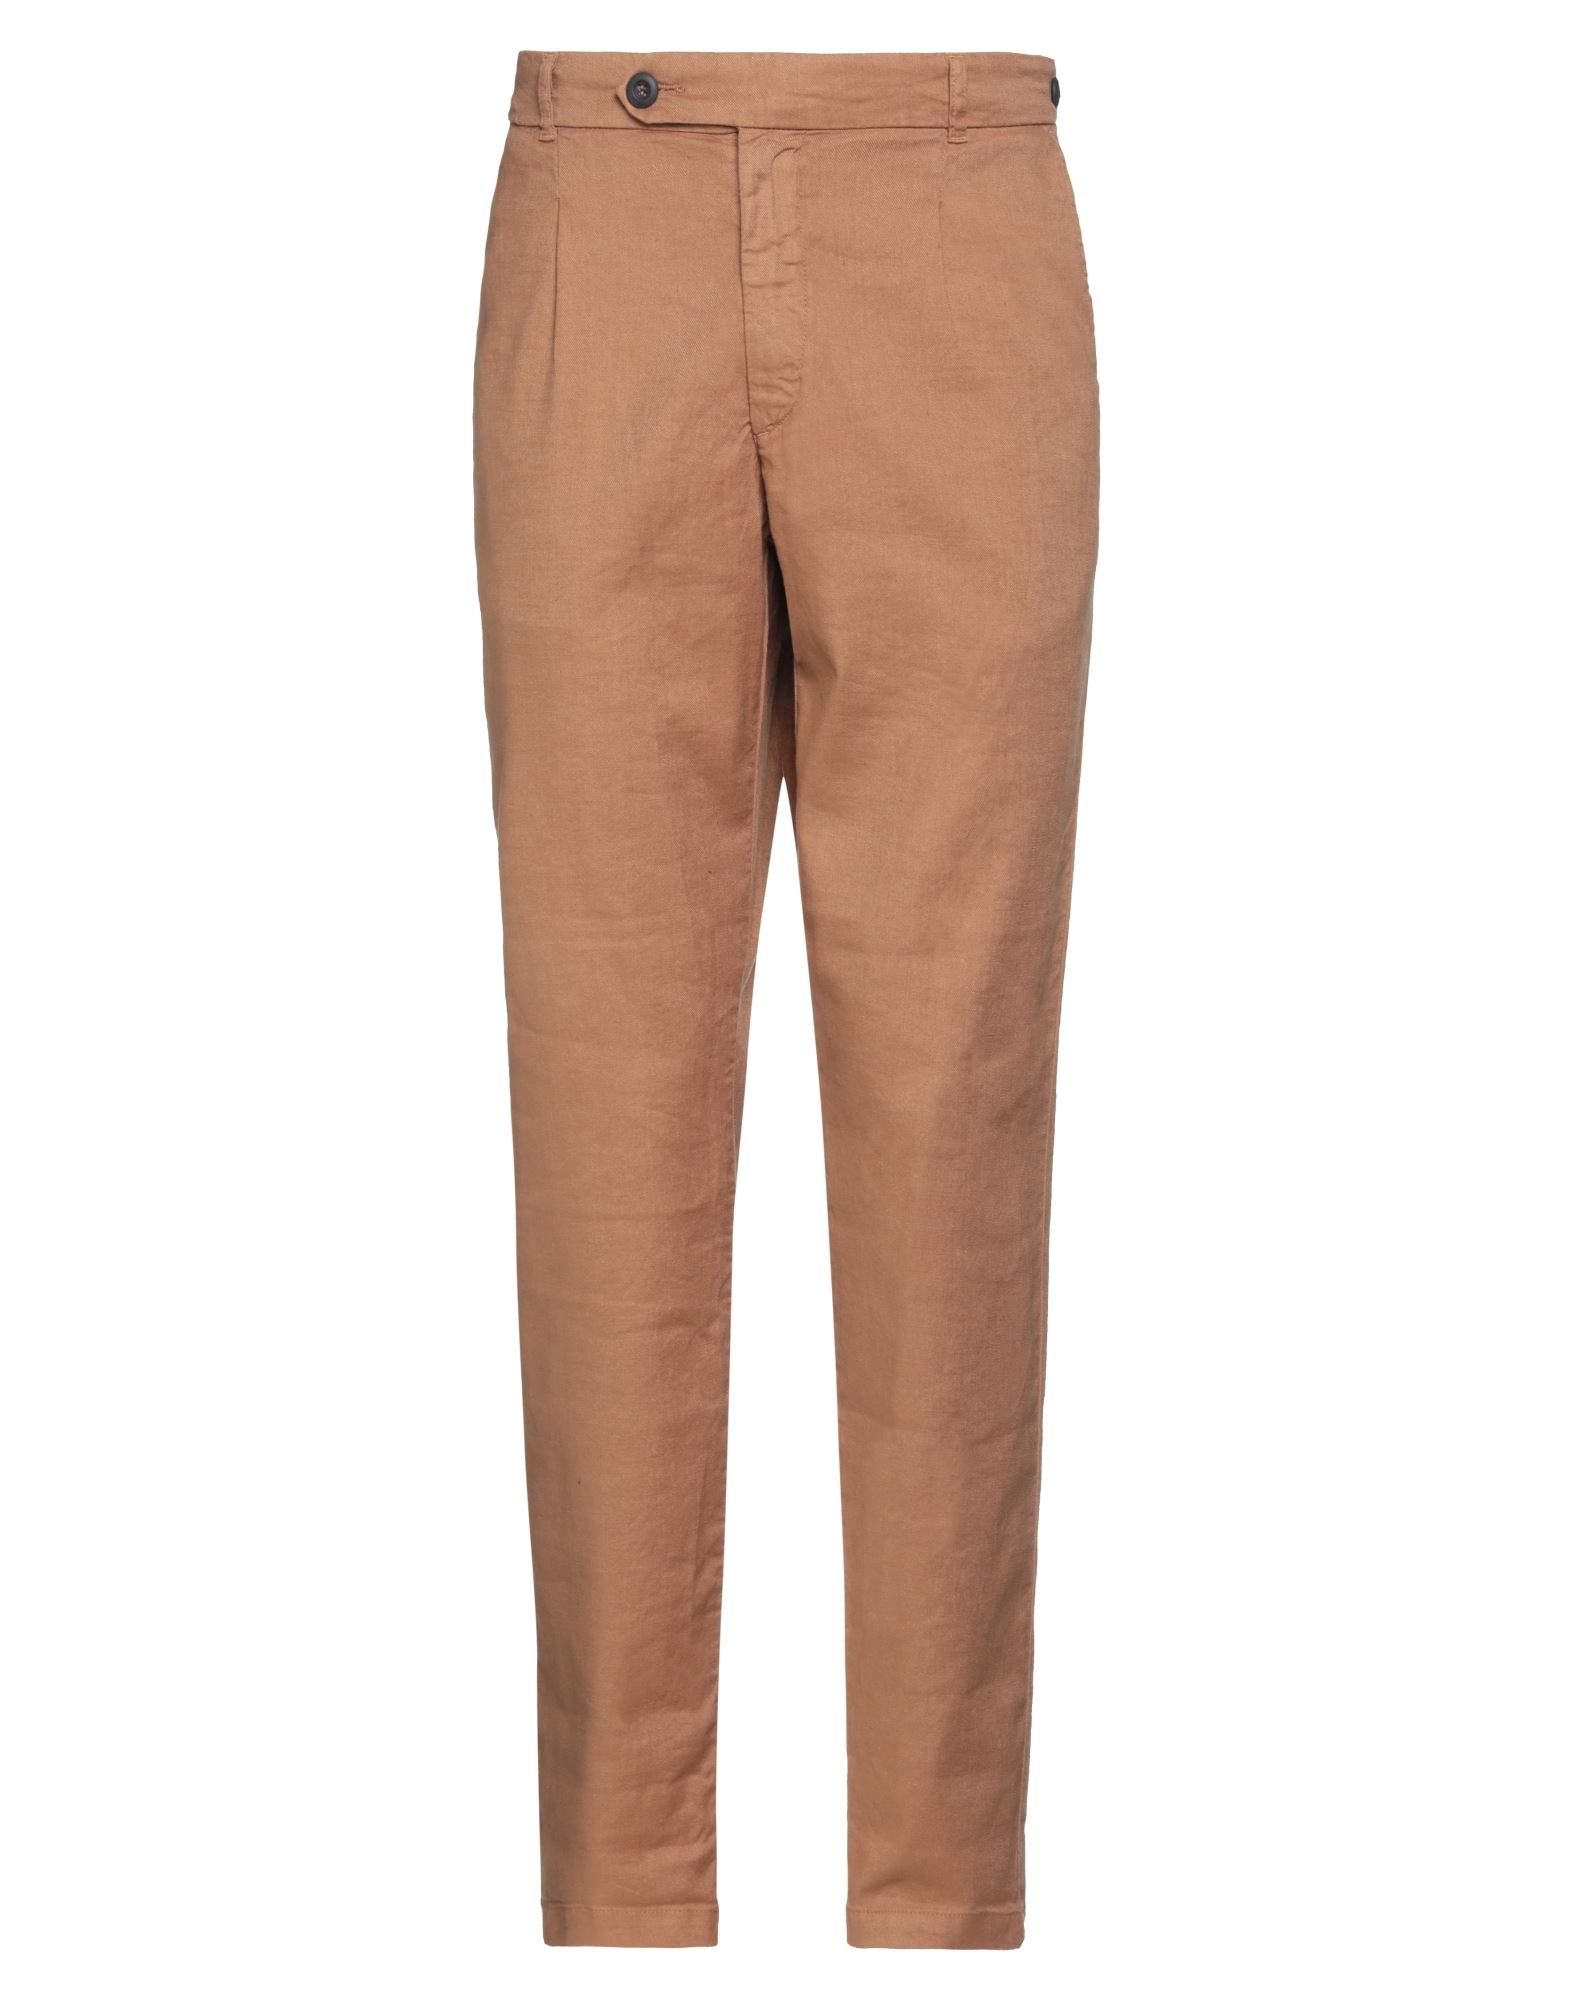 Madson Pants In Camel